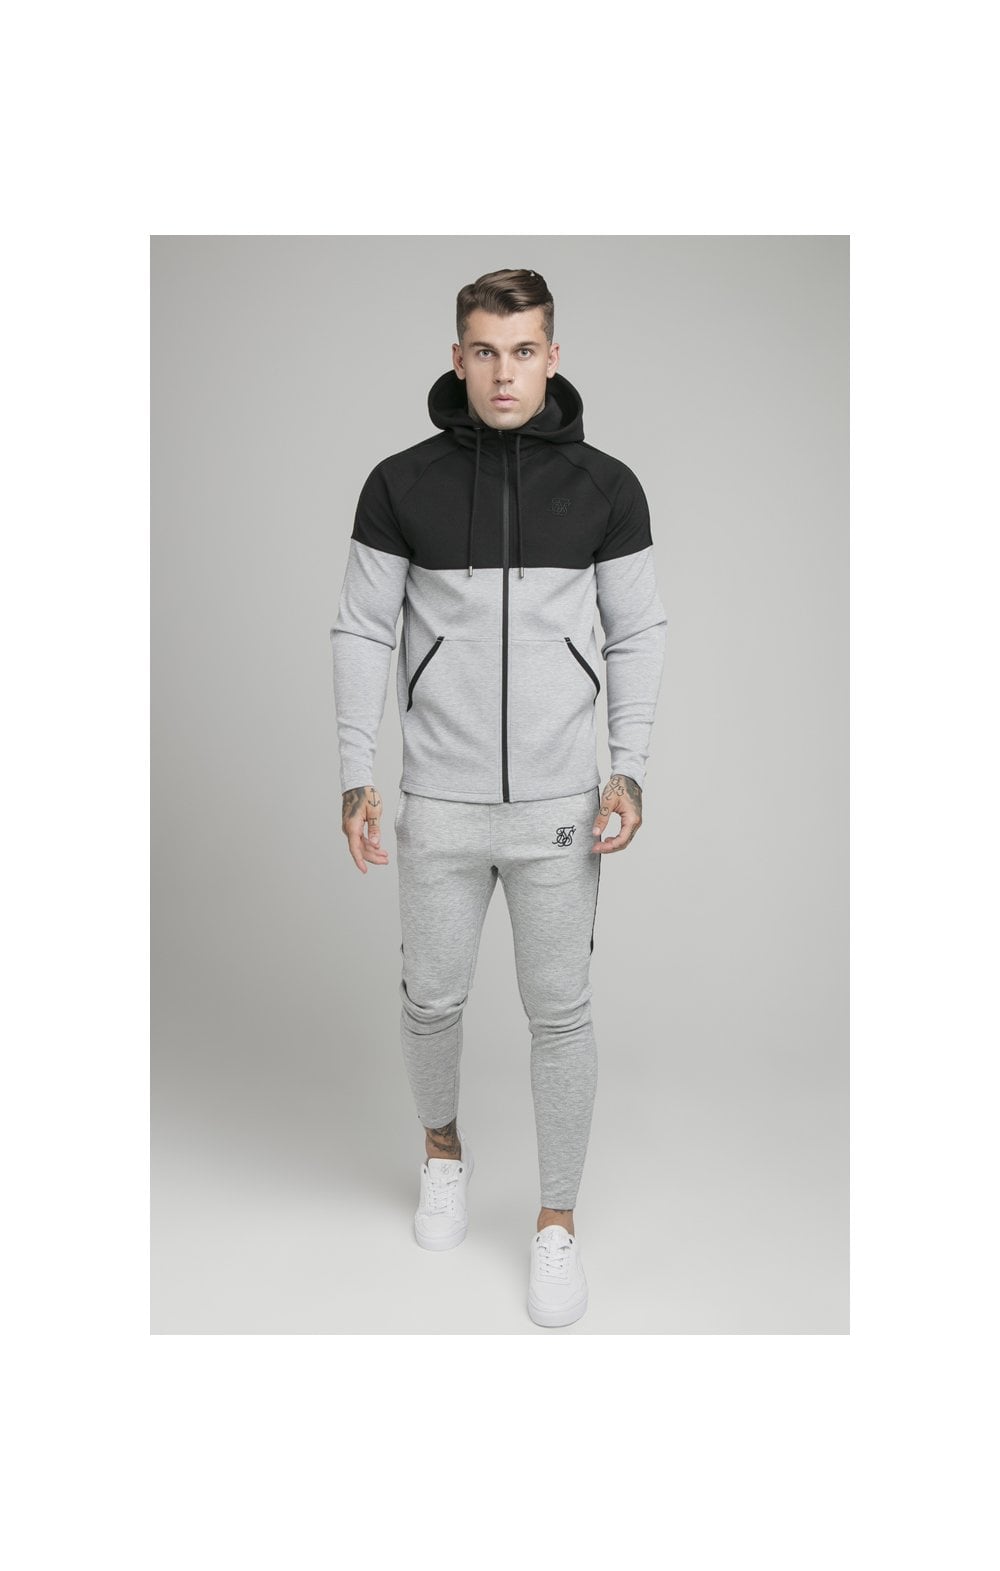 Black Motion Tape Zip Through Hoodie And Jogger Set (1)